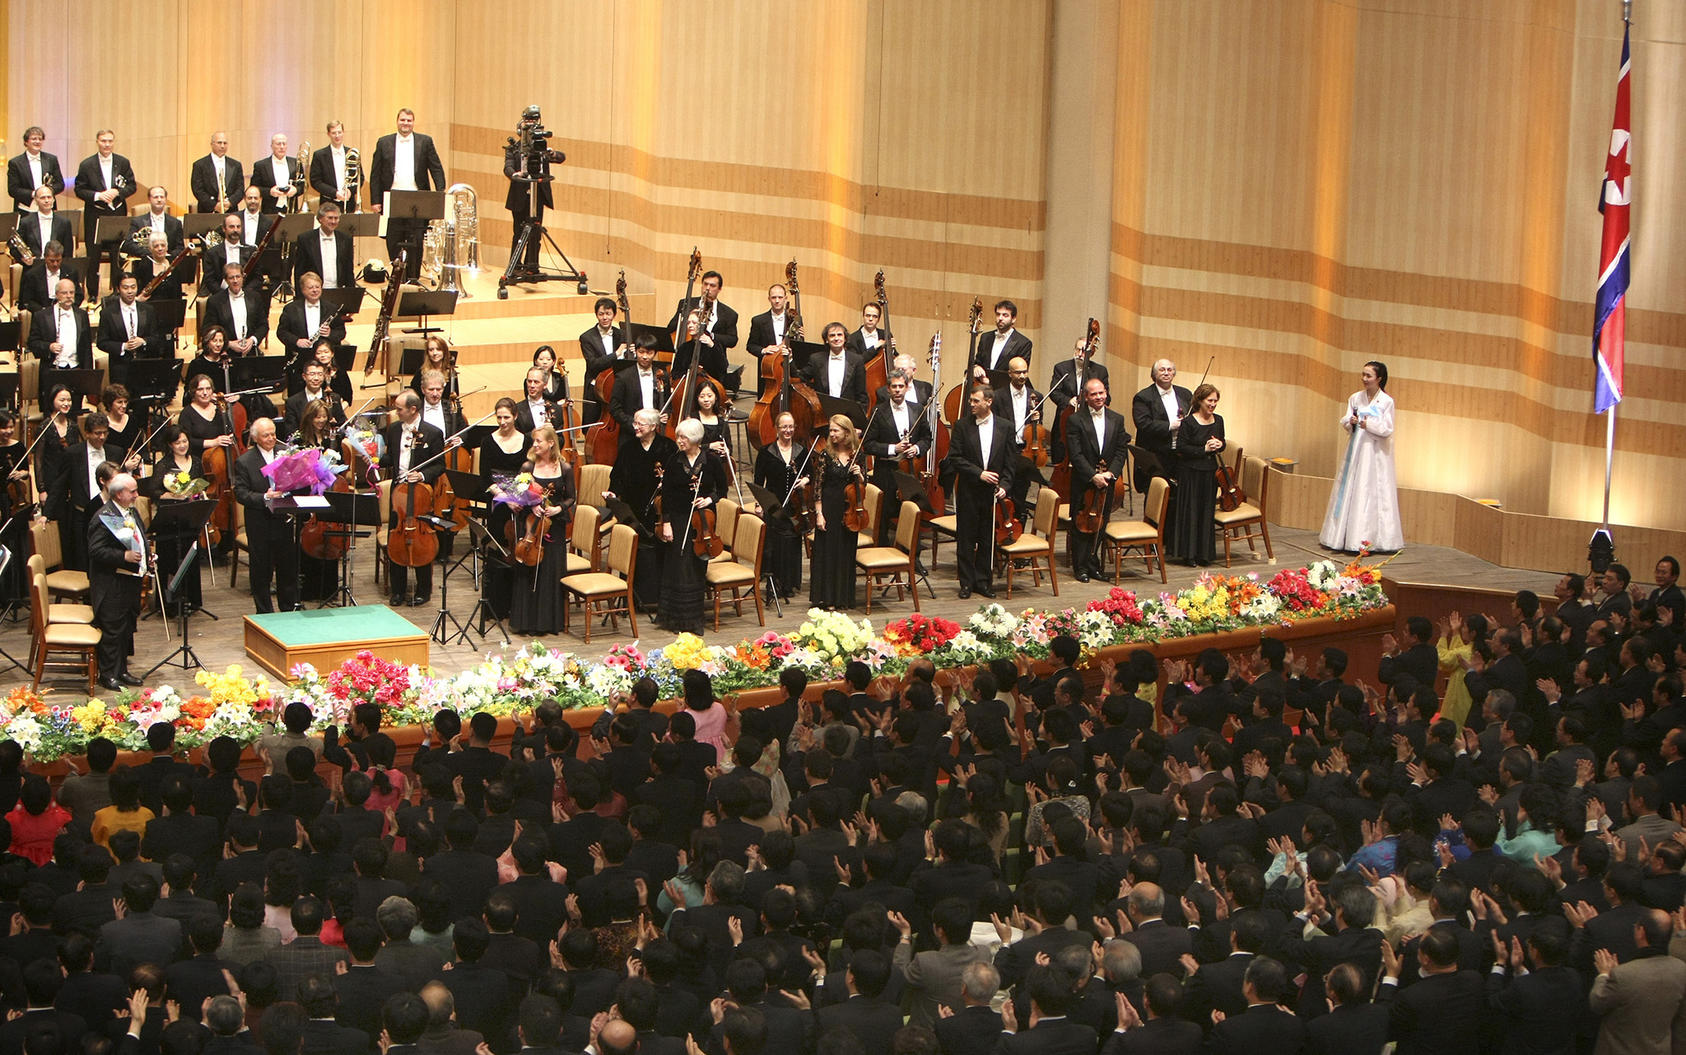 Conductor Lorin Maazel along members of the New York Philharmonic after their concert in Pyongyang, Feb. 26, 2008. The performance marked the first time a major American cultural organization had appeared in North Korea. (Chang W. Lee/The New York Times)